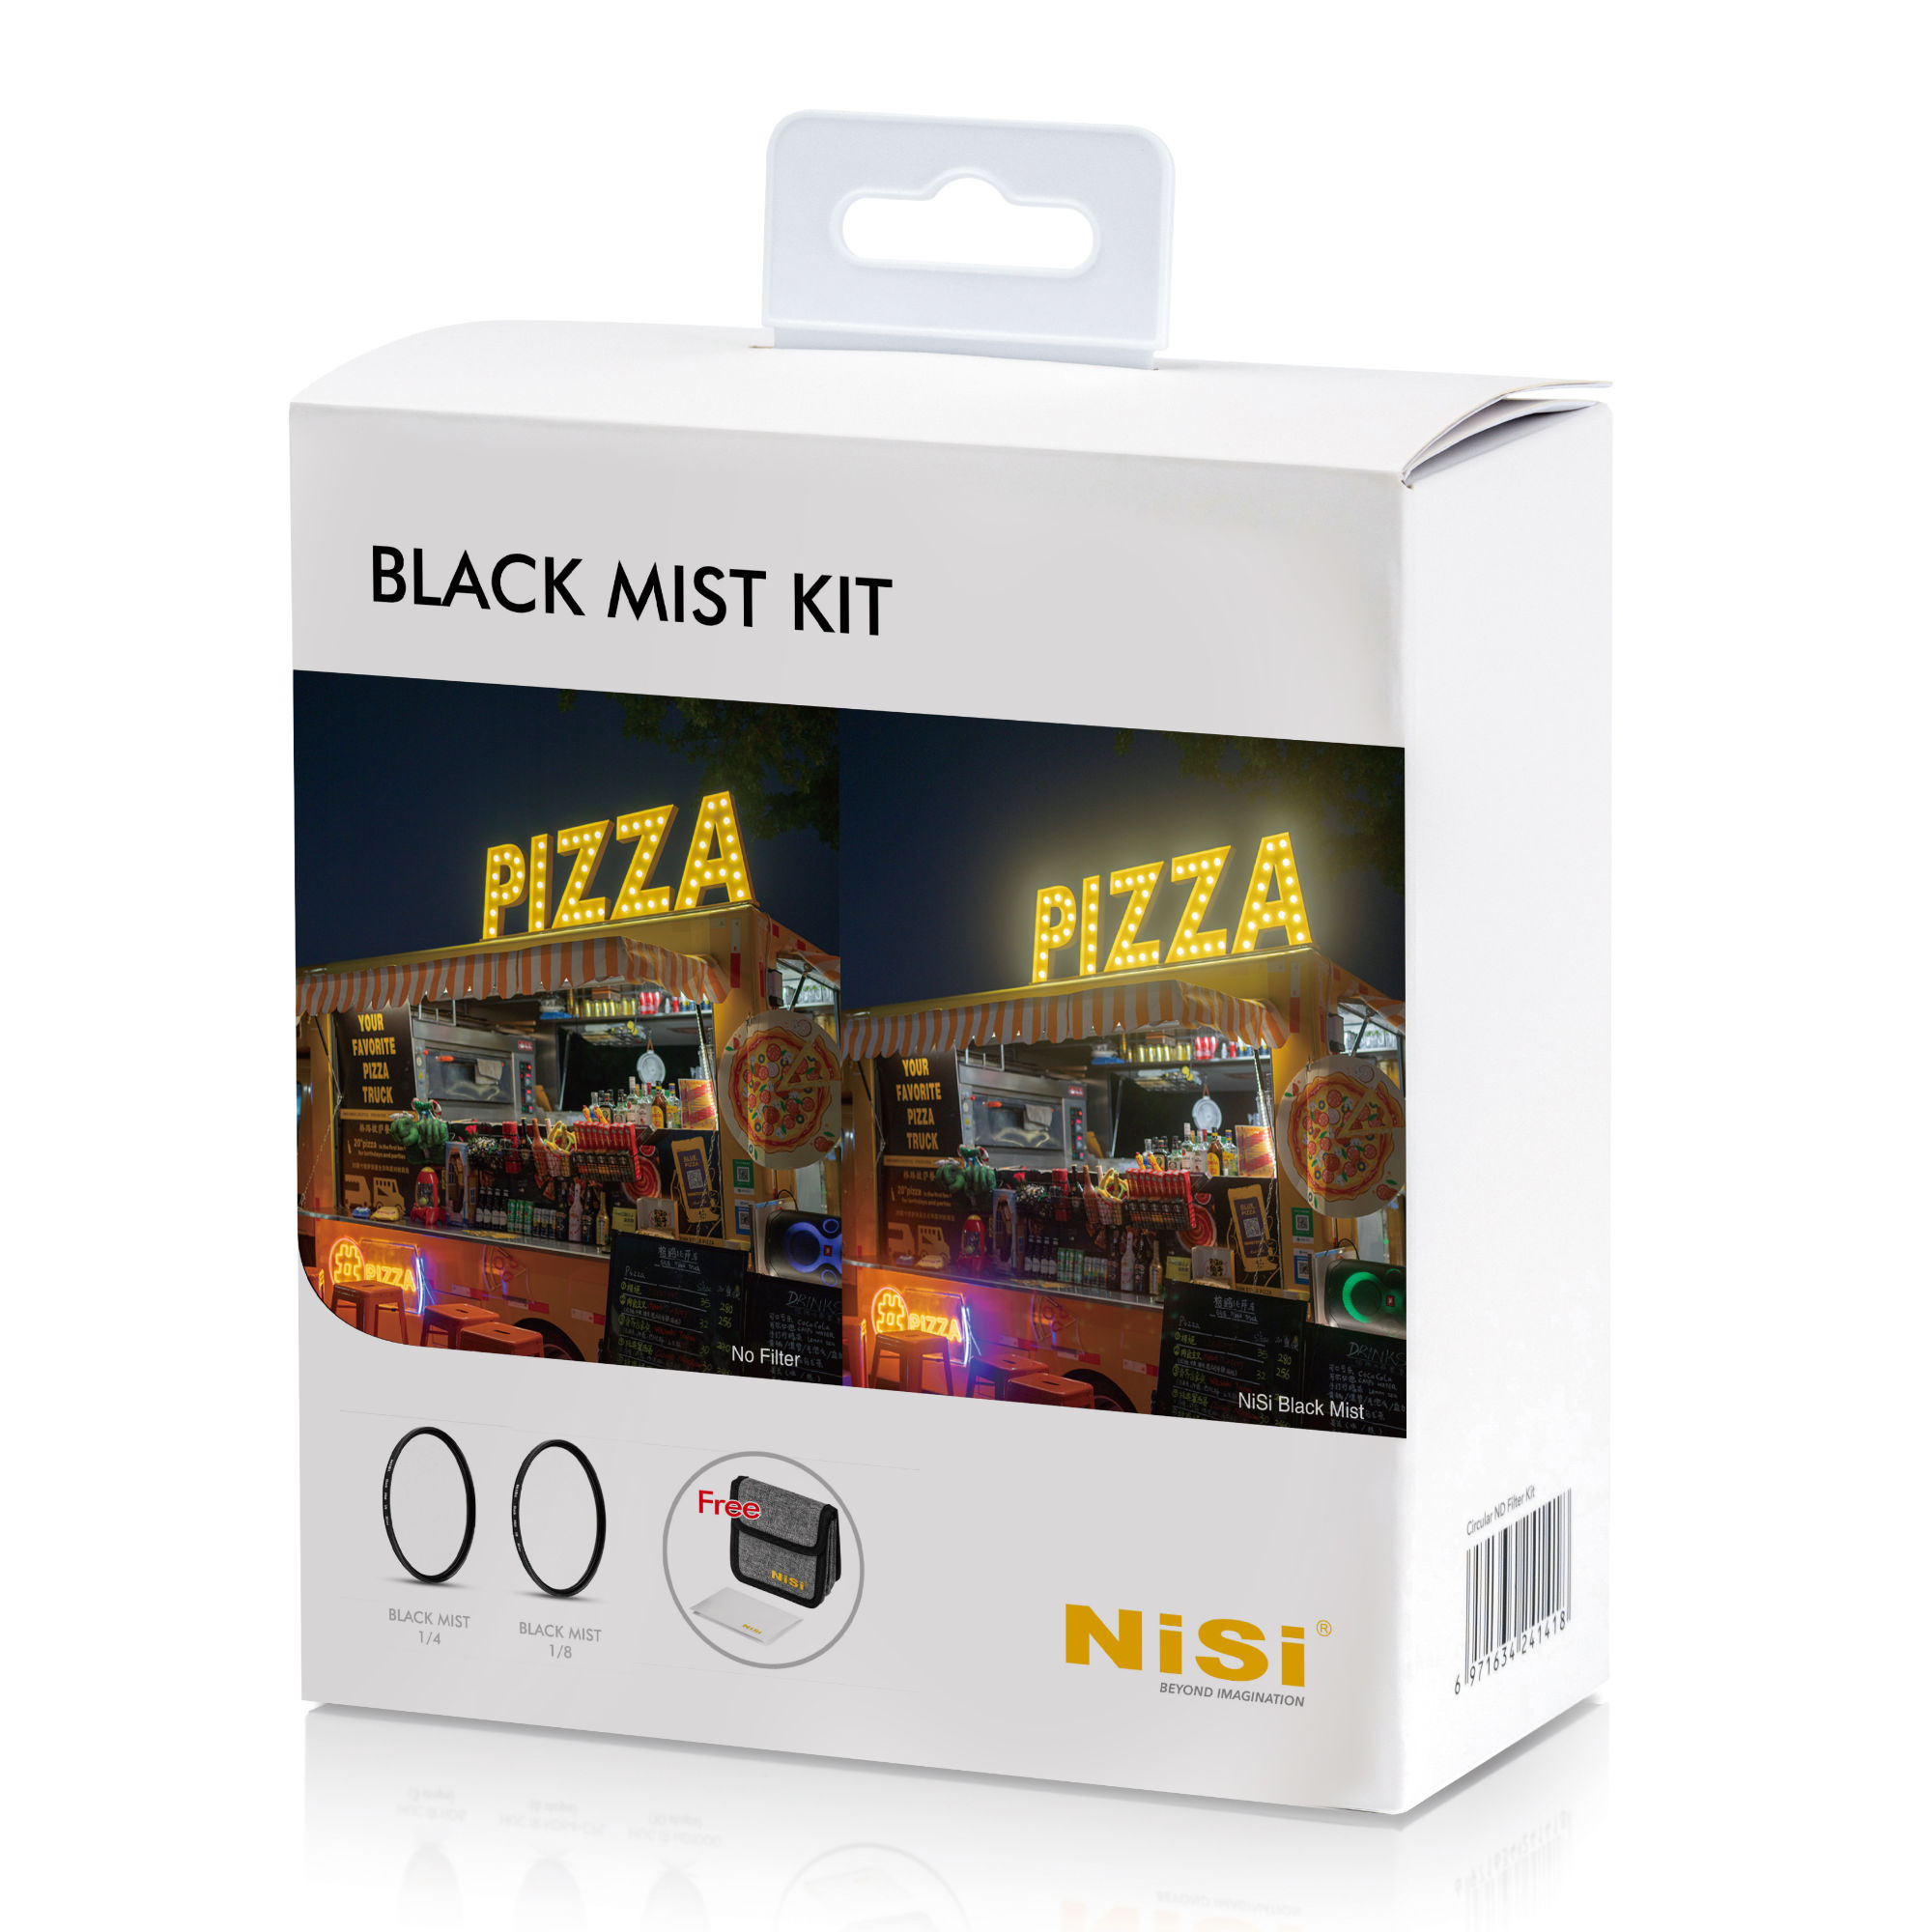 NiSi Black Mist Kit with 1/4, 1/8 and Case (43mm)